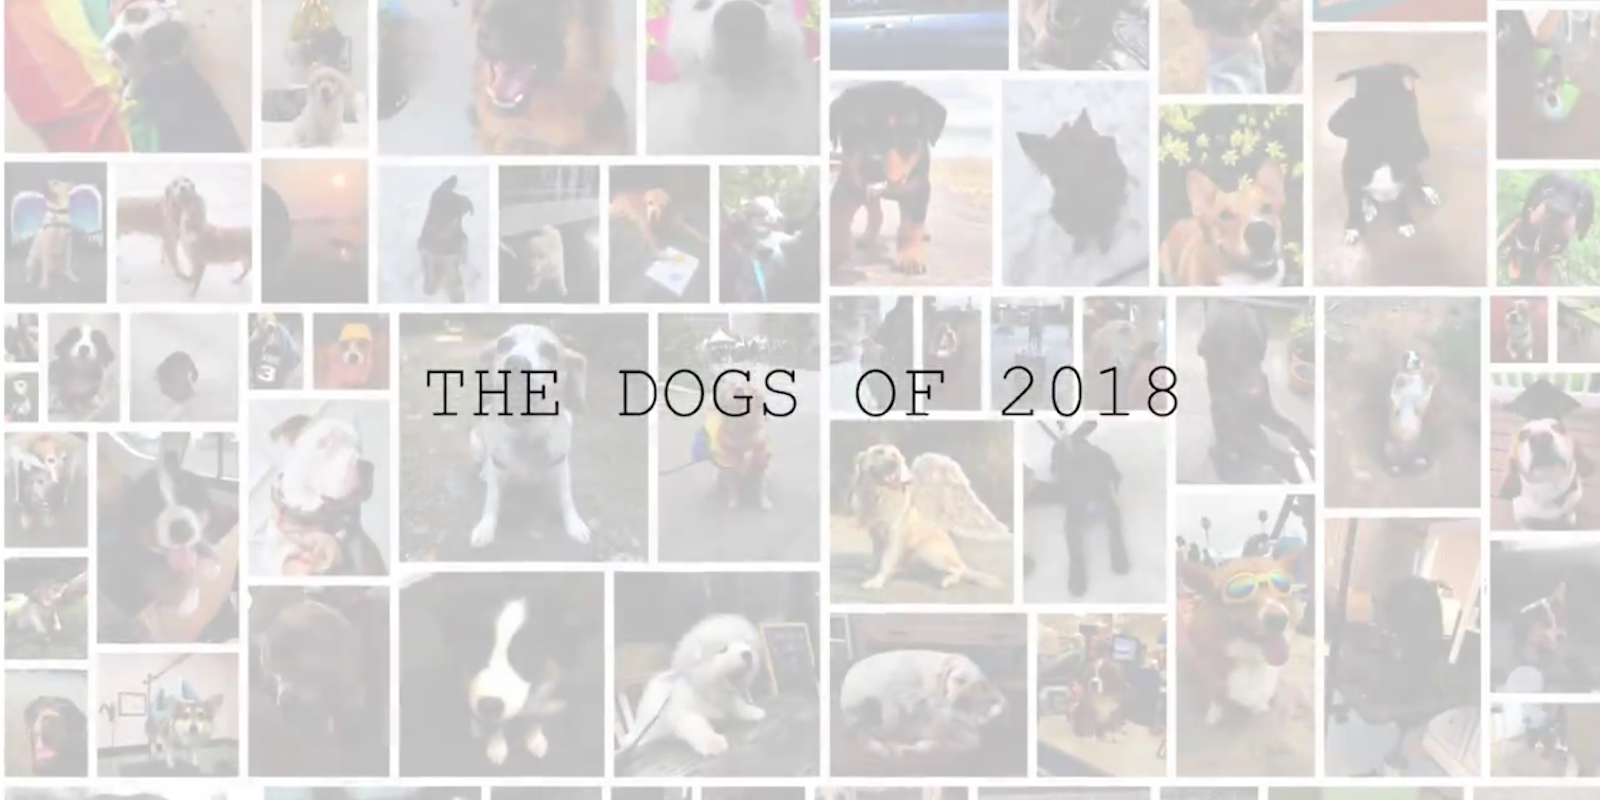 The dogs of 2018